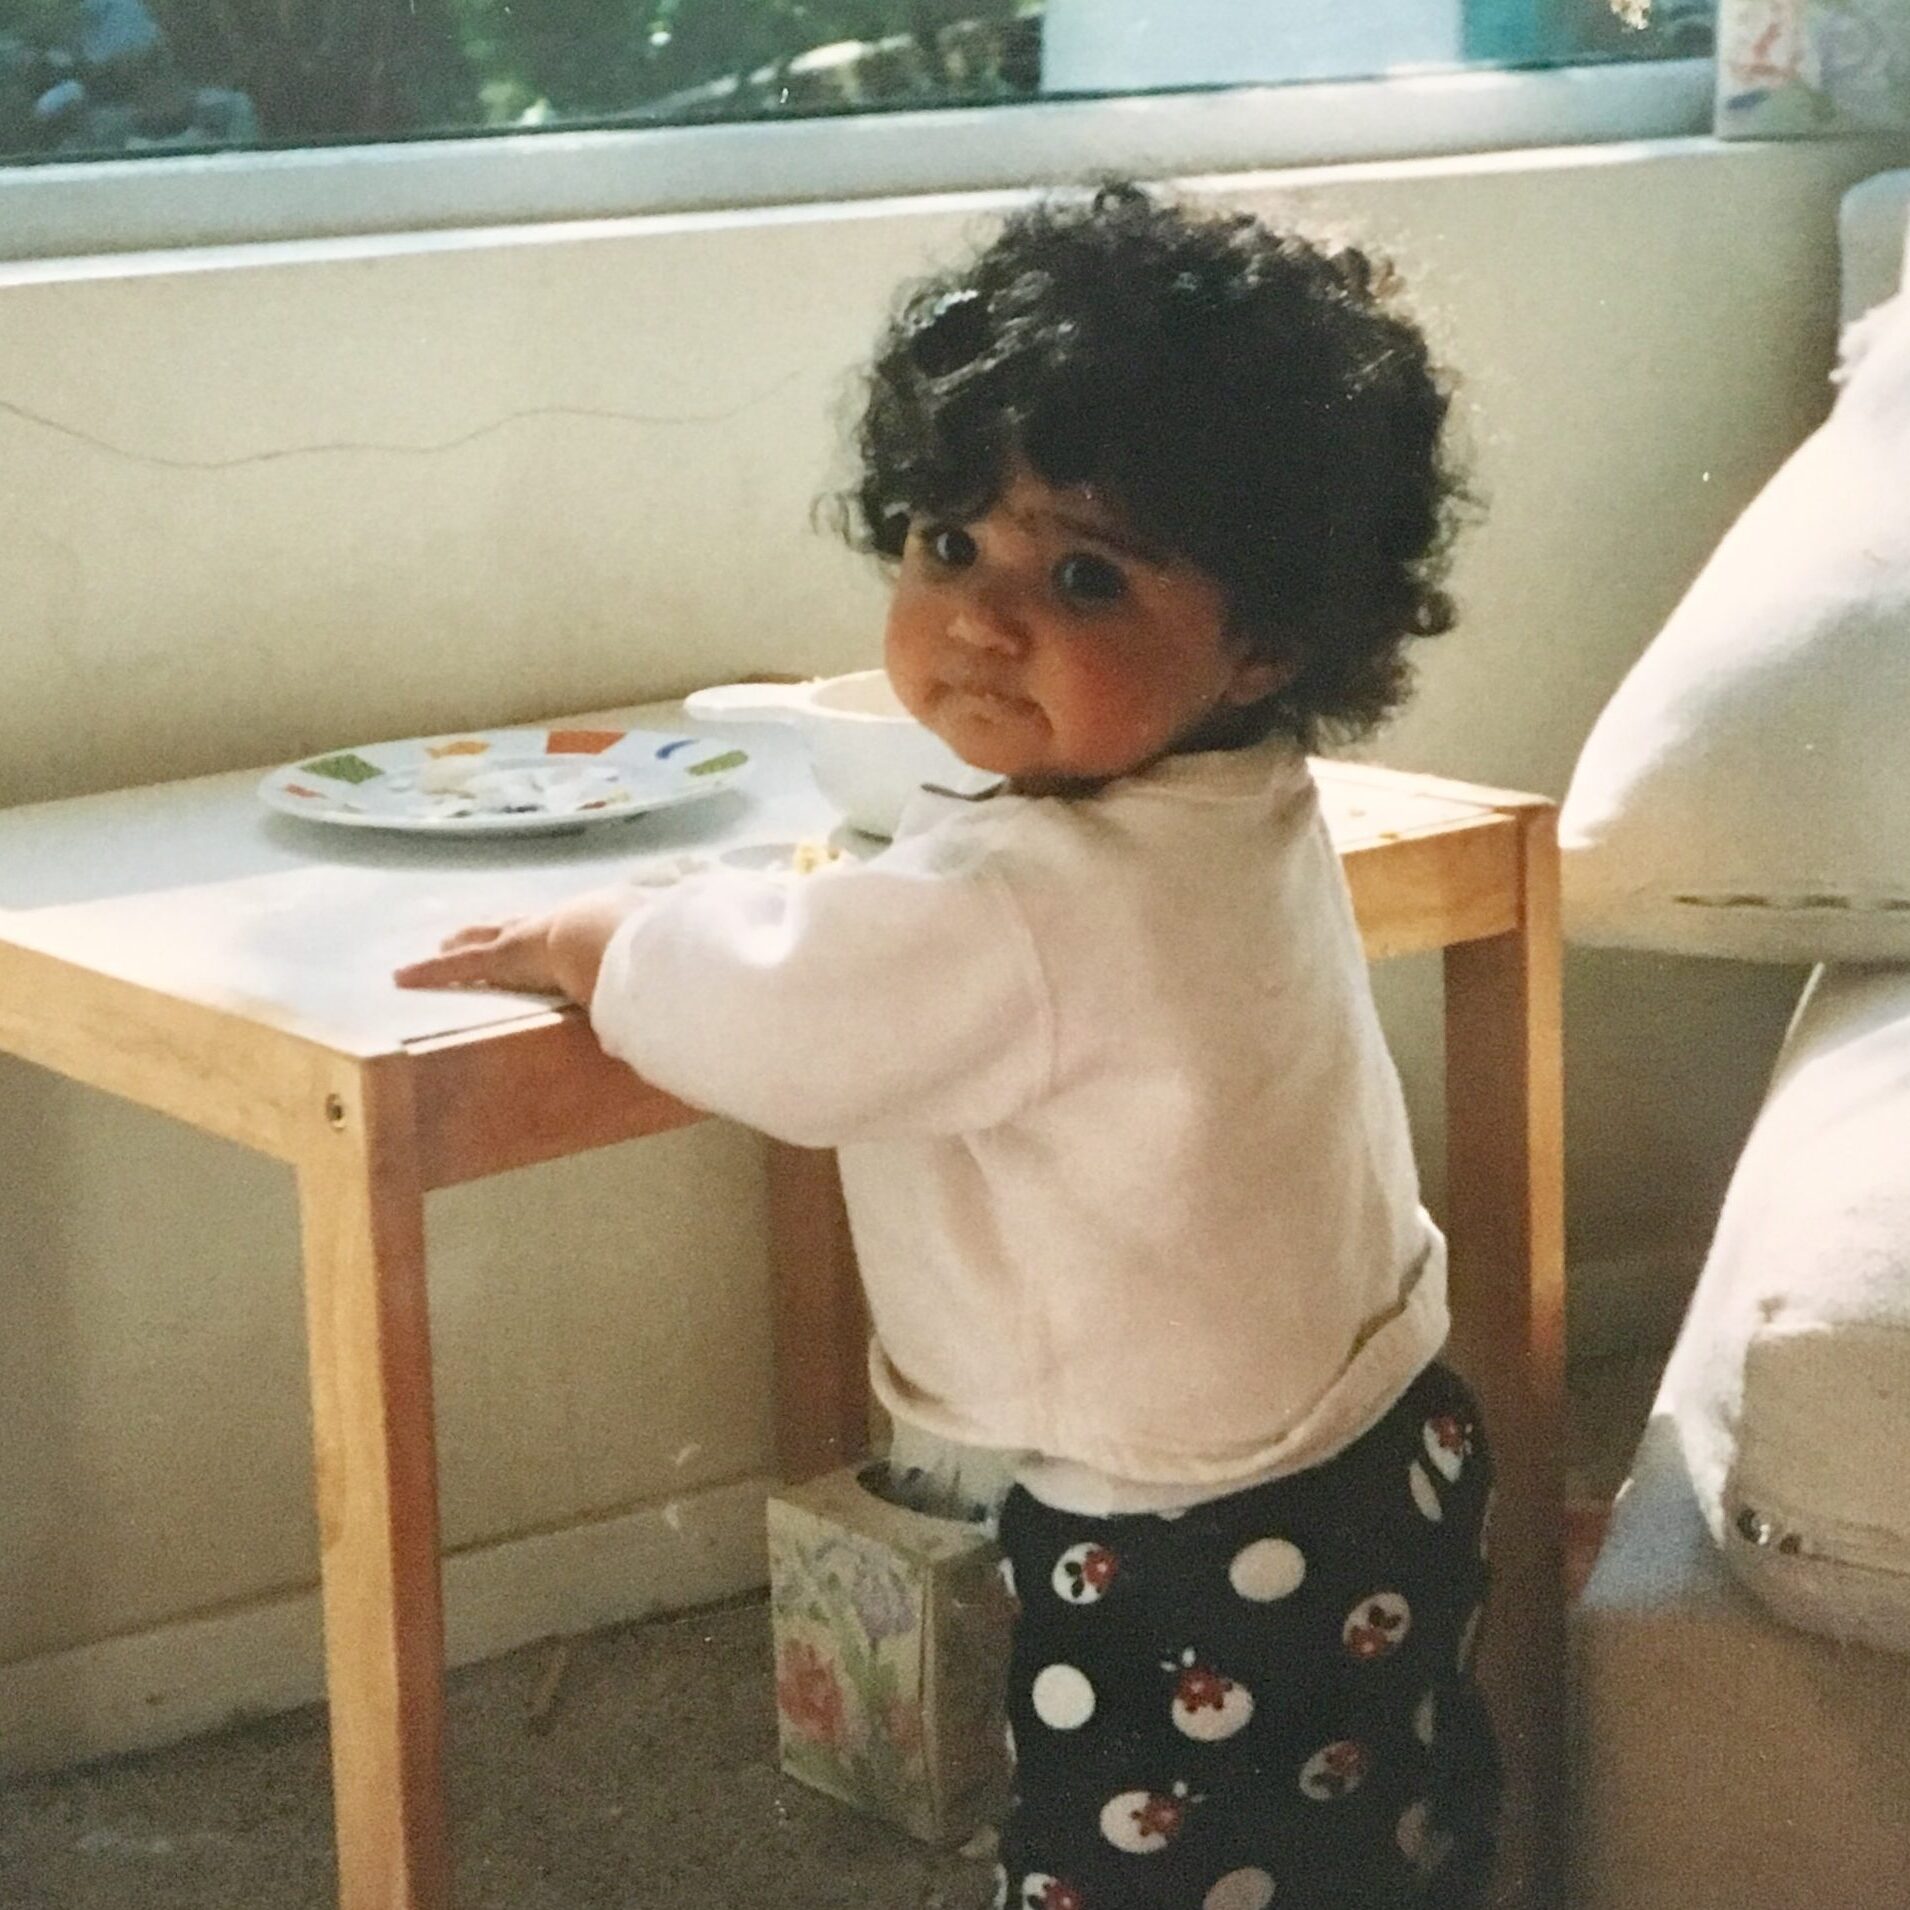 toddler playing on small table